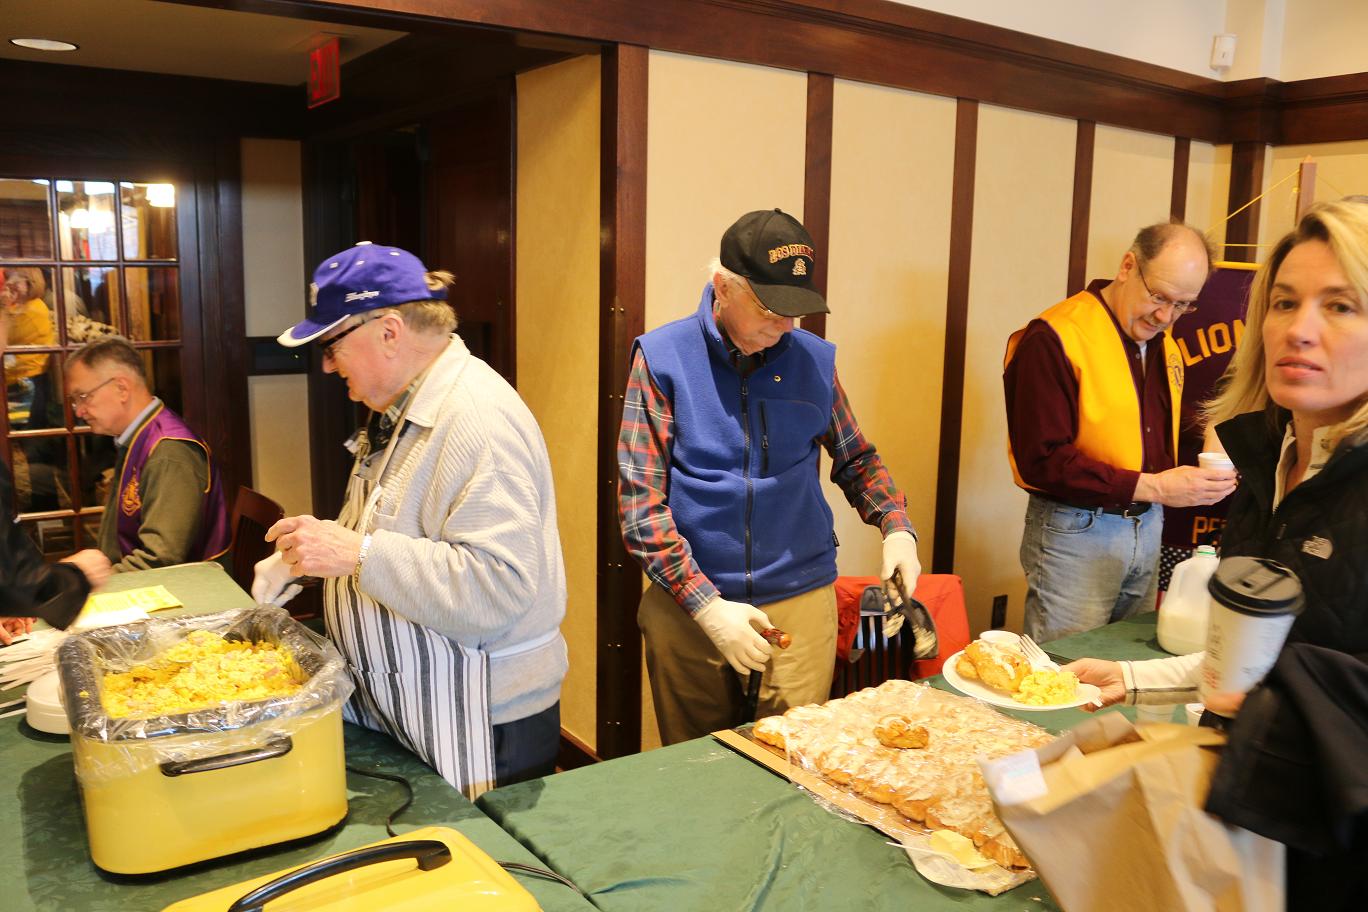 The Perry Lions Club will serve their annual pre-BRR breakfast, complete with pancakes, eggs and St. Pat's cinnamon rolls.